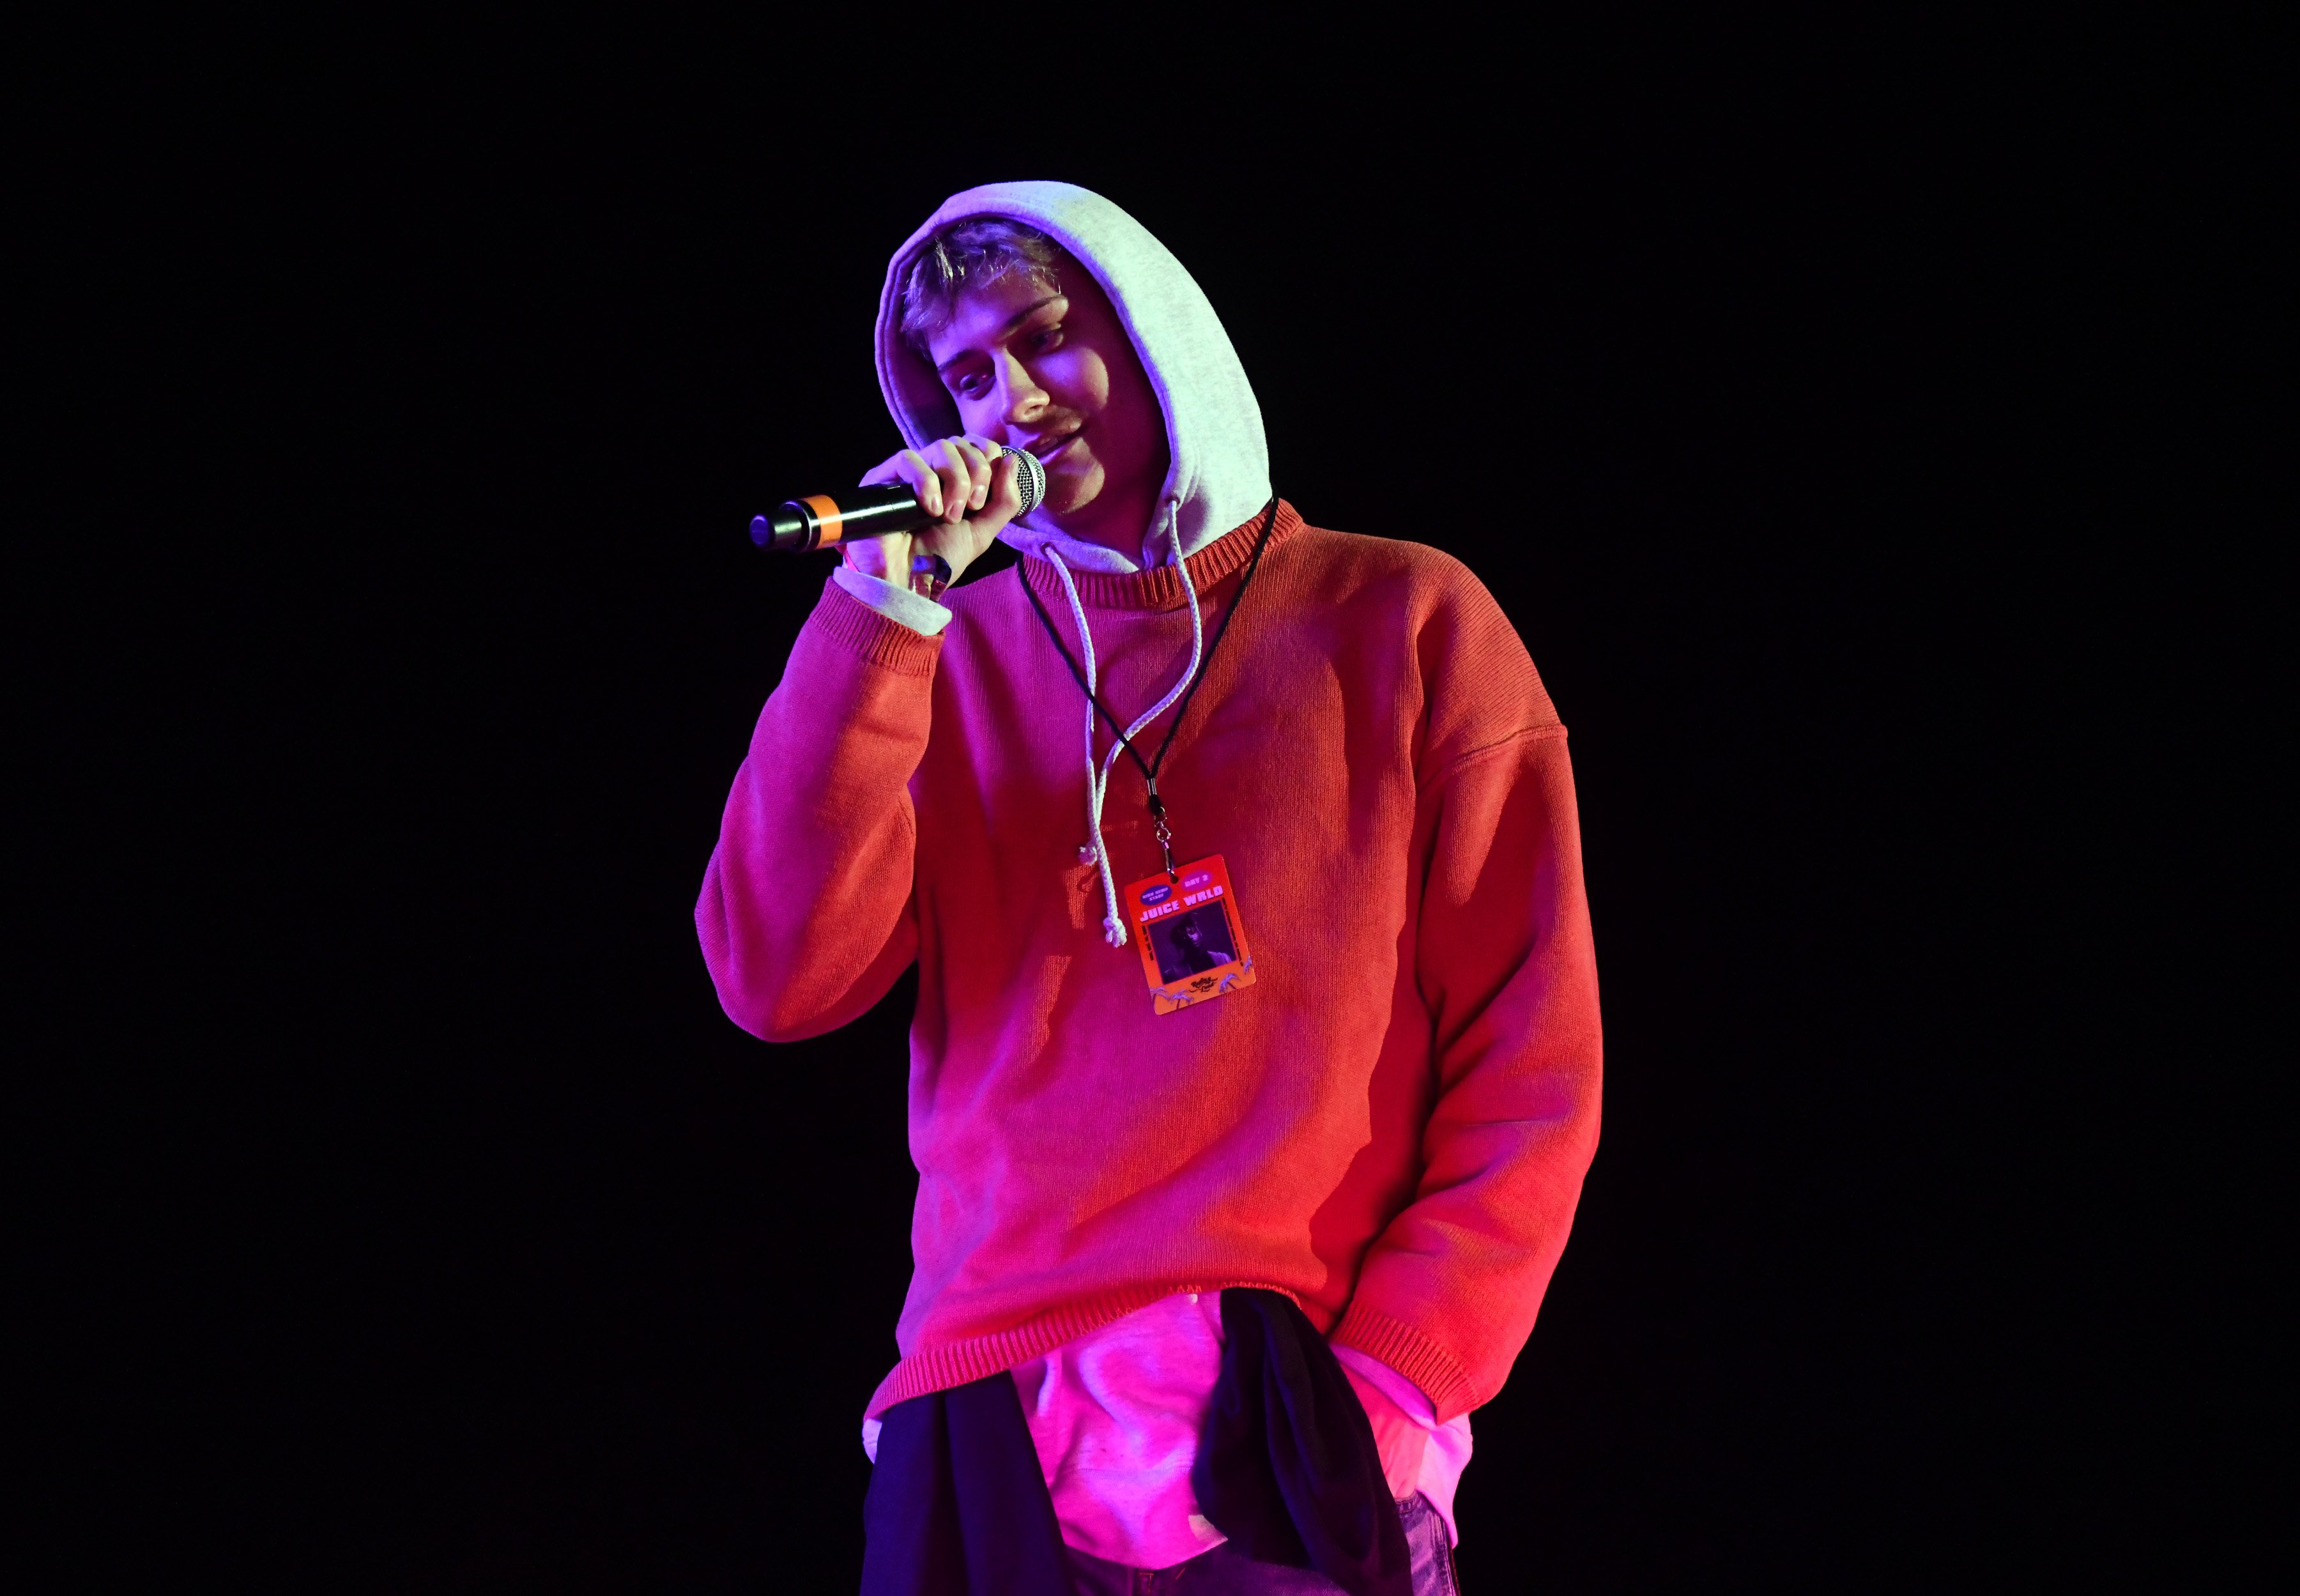 Cole Bennett of Lyrical Lemonade performs onstage during day 2 of the Rolling Loud Festival